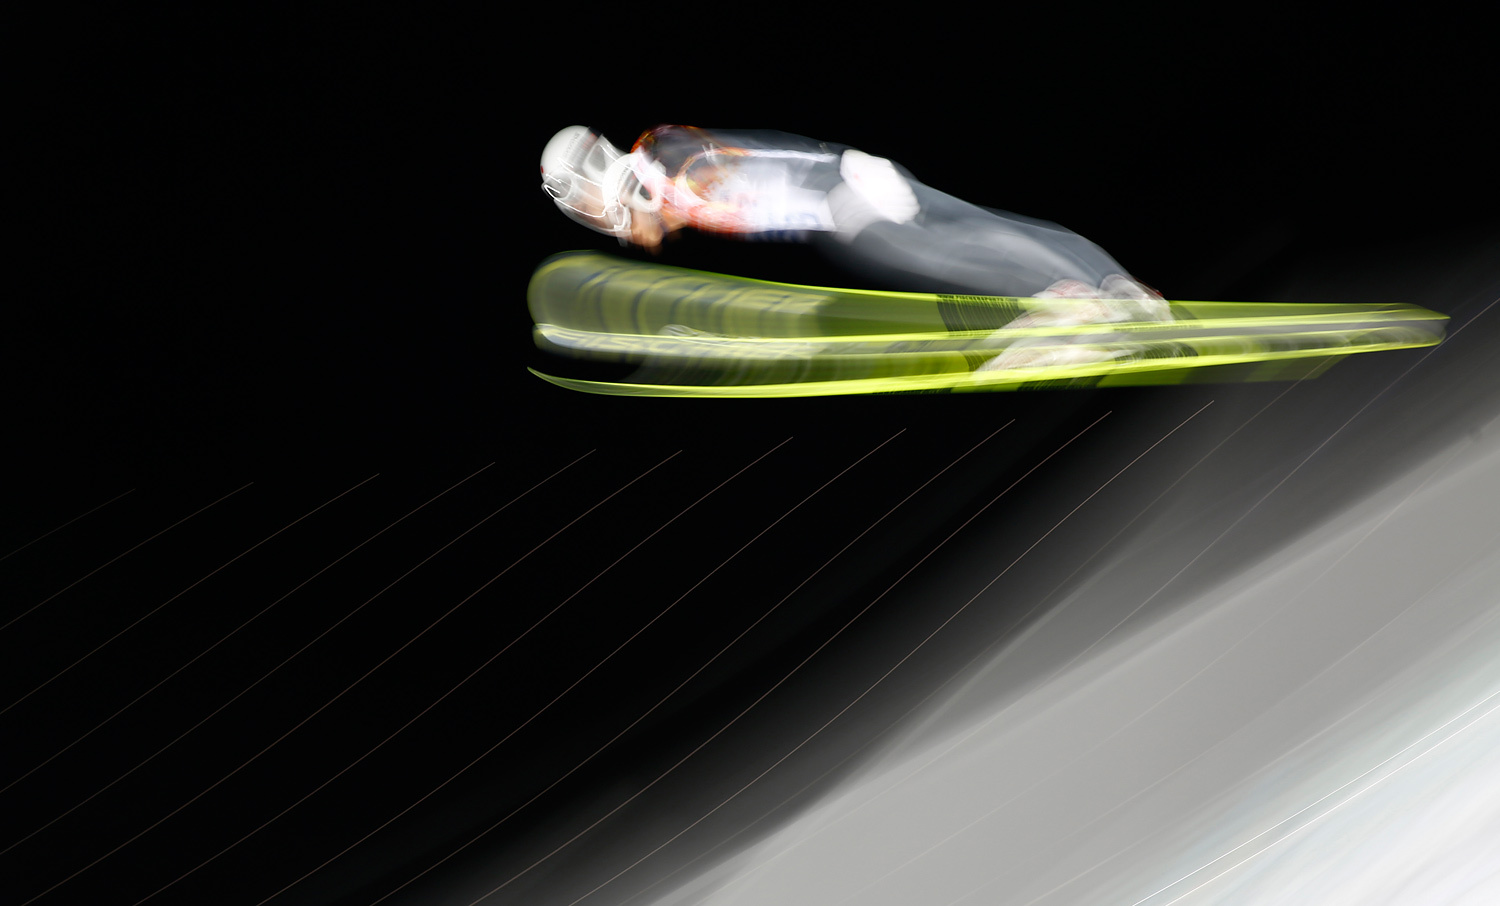 Japan's Reruhi Shimizu soars through the air during his trial jump in the men's ski jumping individual normal hill qualification round event at the Sochi 2014 Winter Olympic Games February 8, 2014.